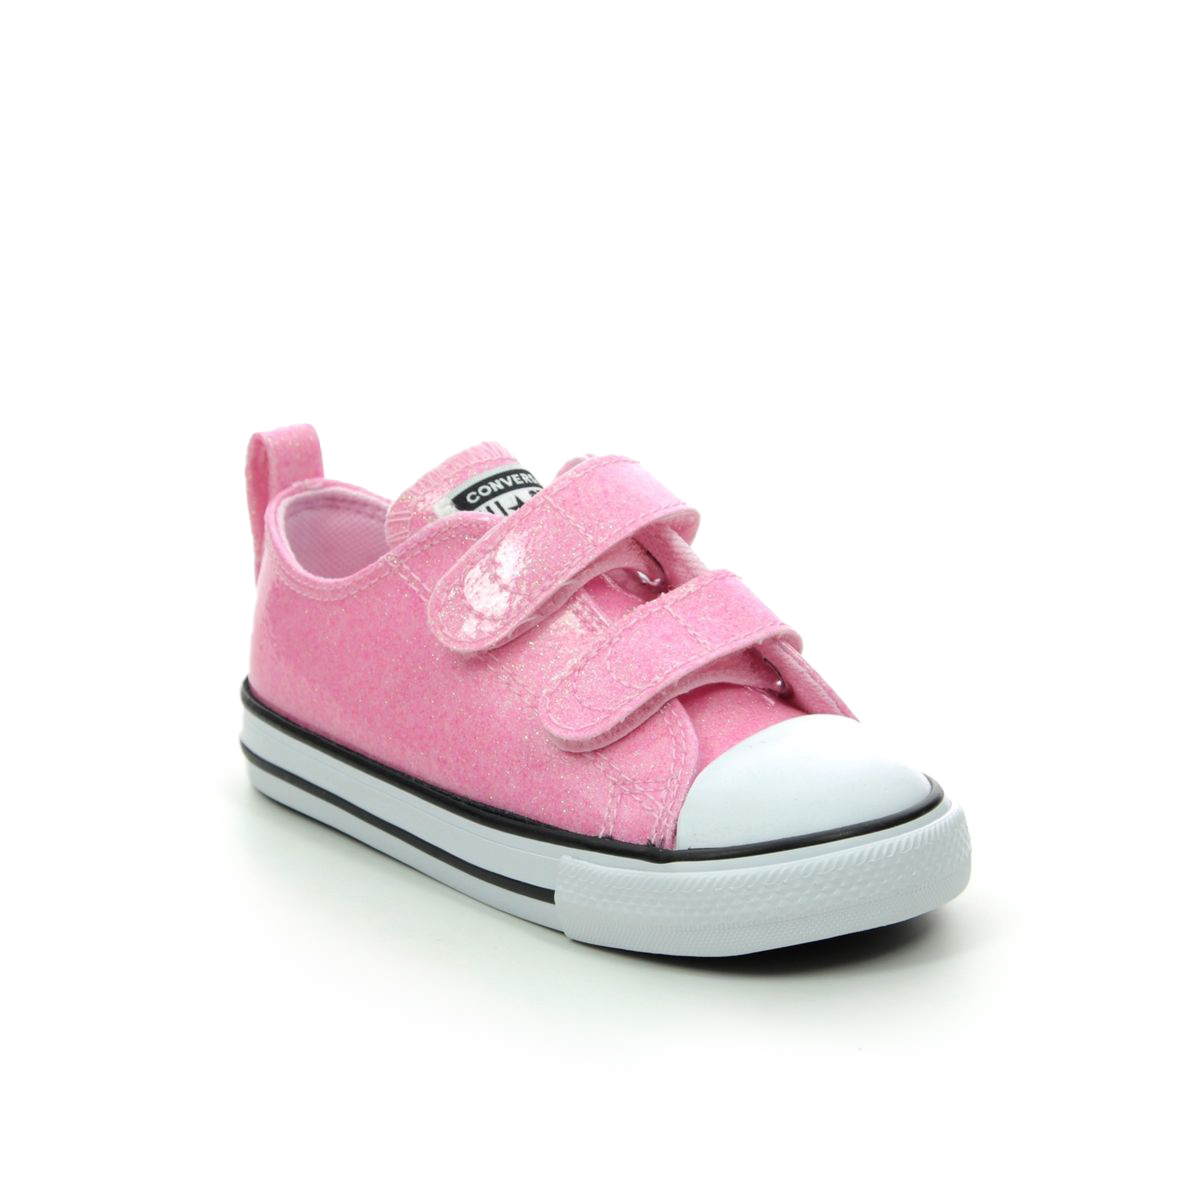 converse boots pink